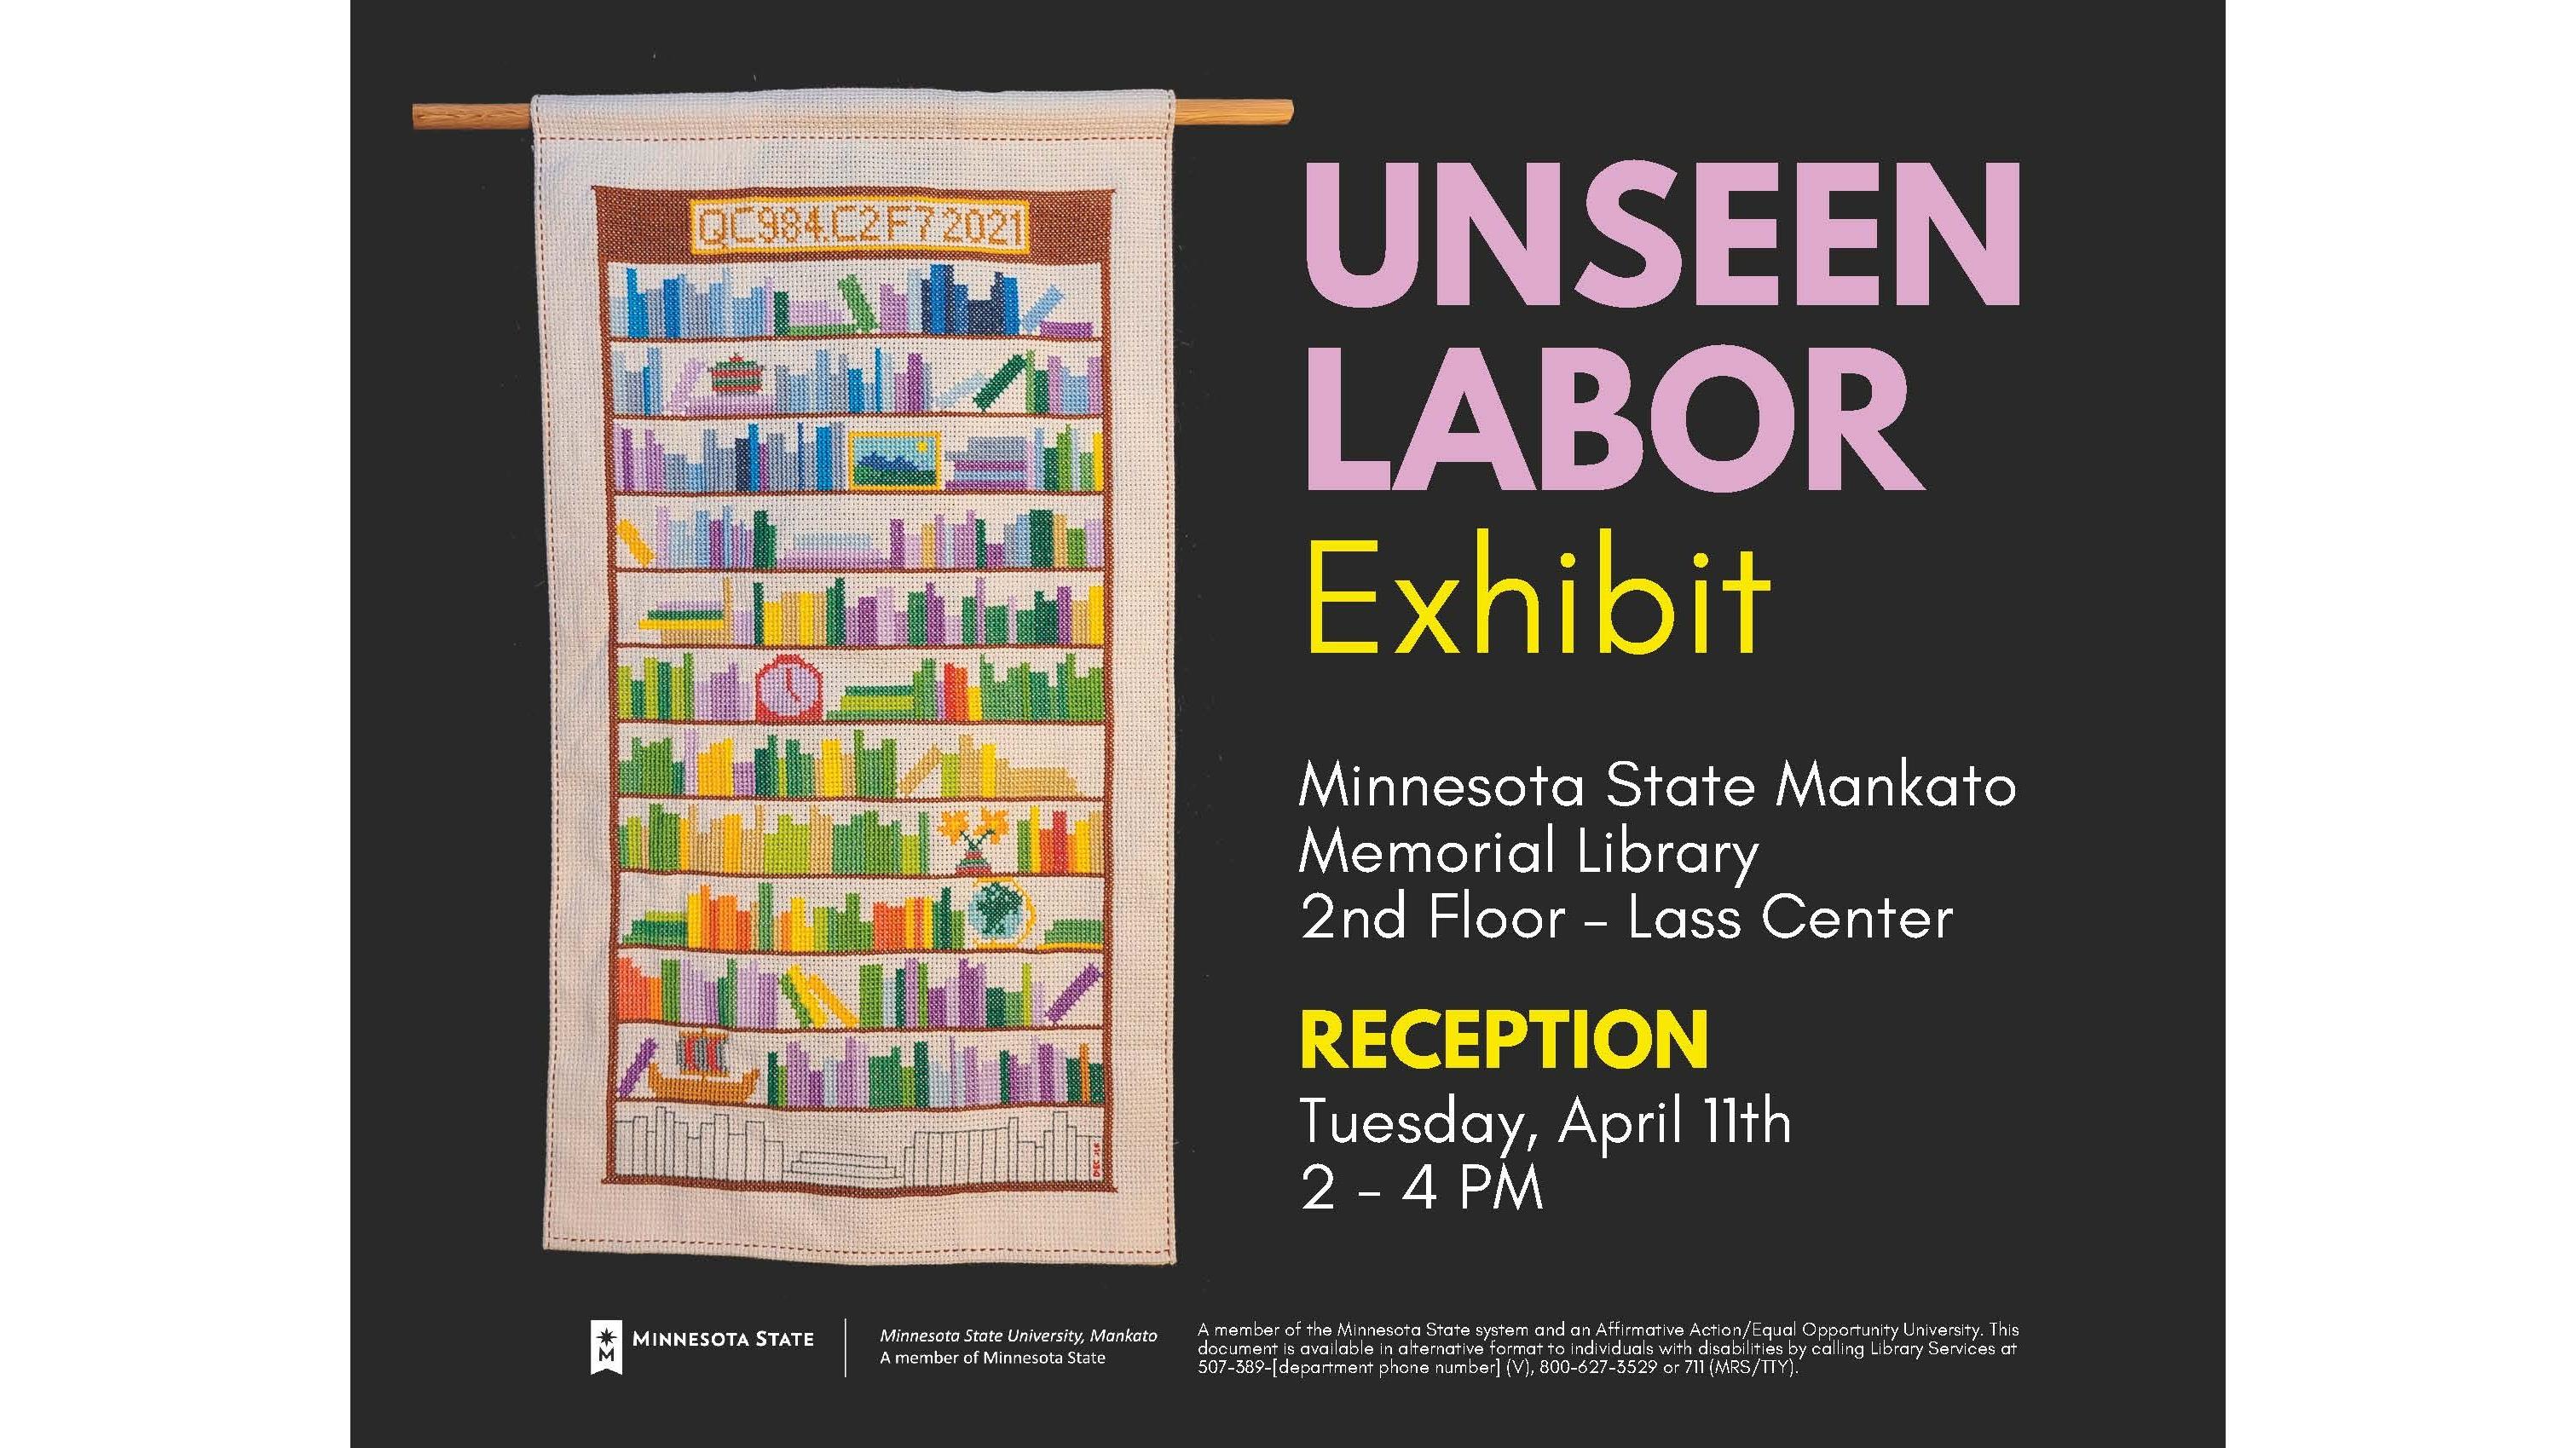 A flyer with program information for the Unseen Labor exhibit.